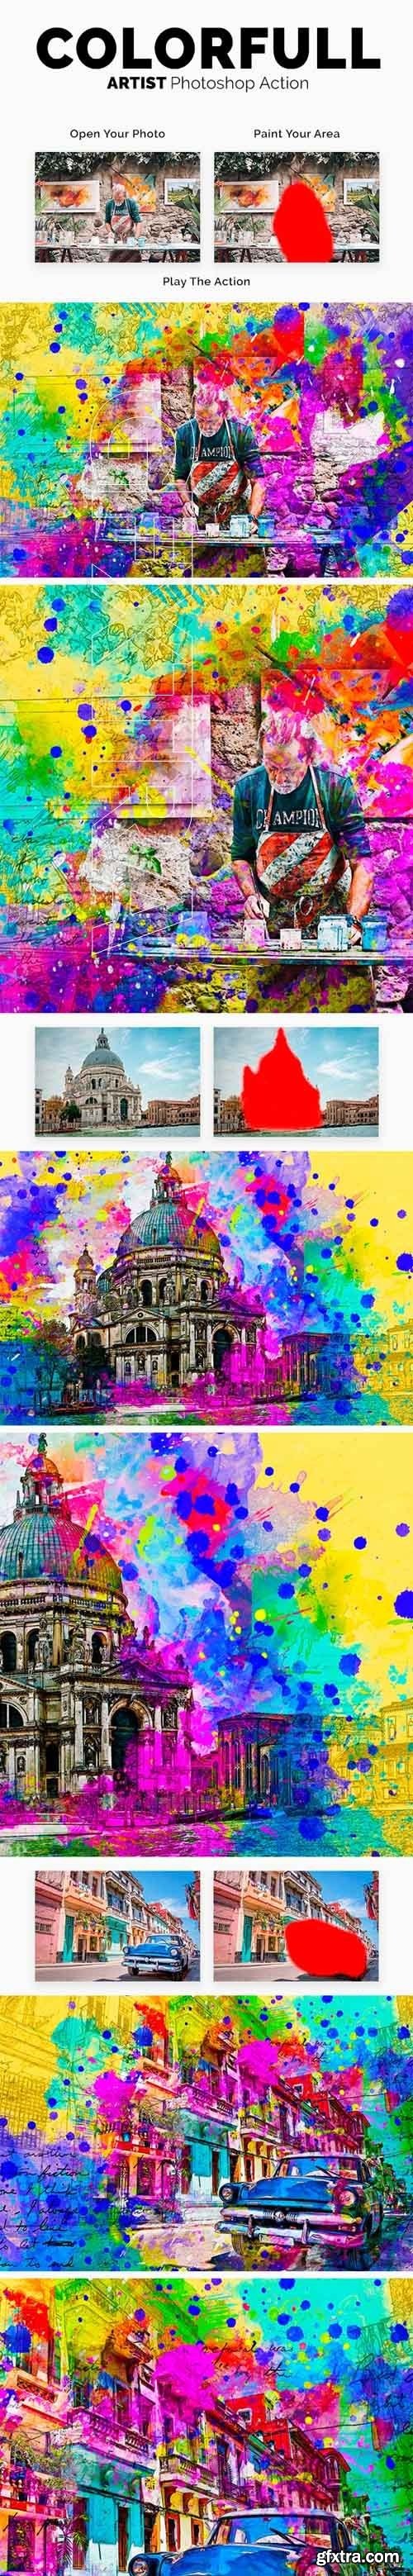 GraphicRiver - ColorFull Artist Photoshop Action 20485419